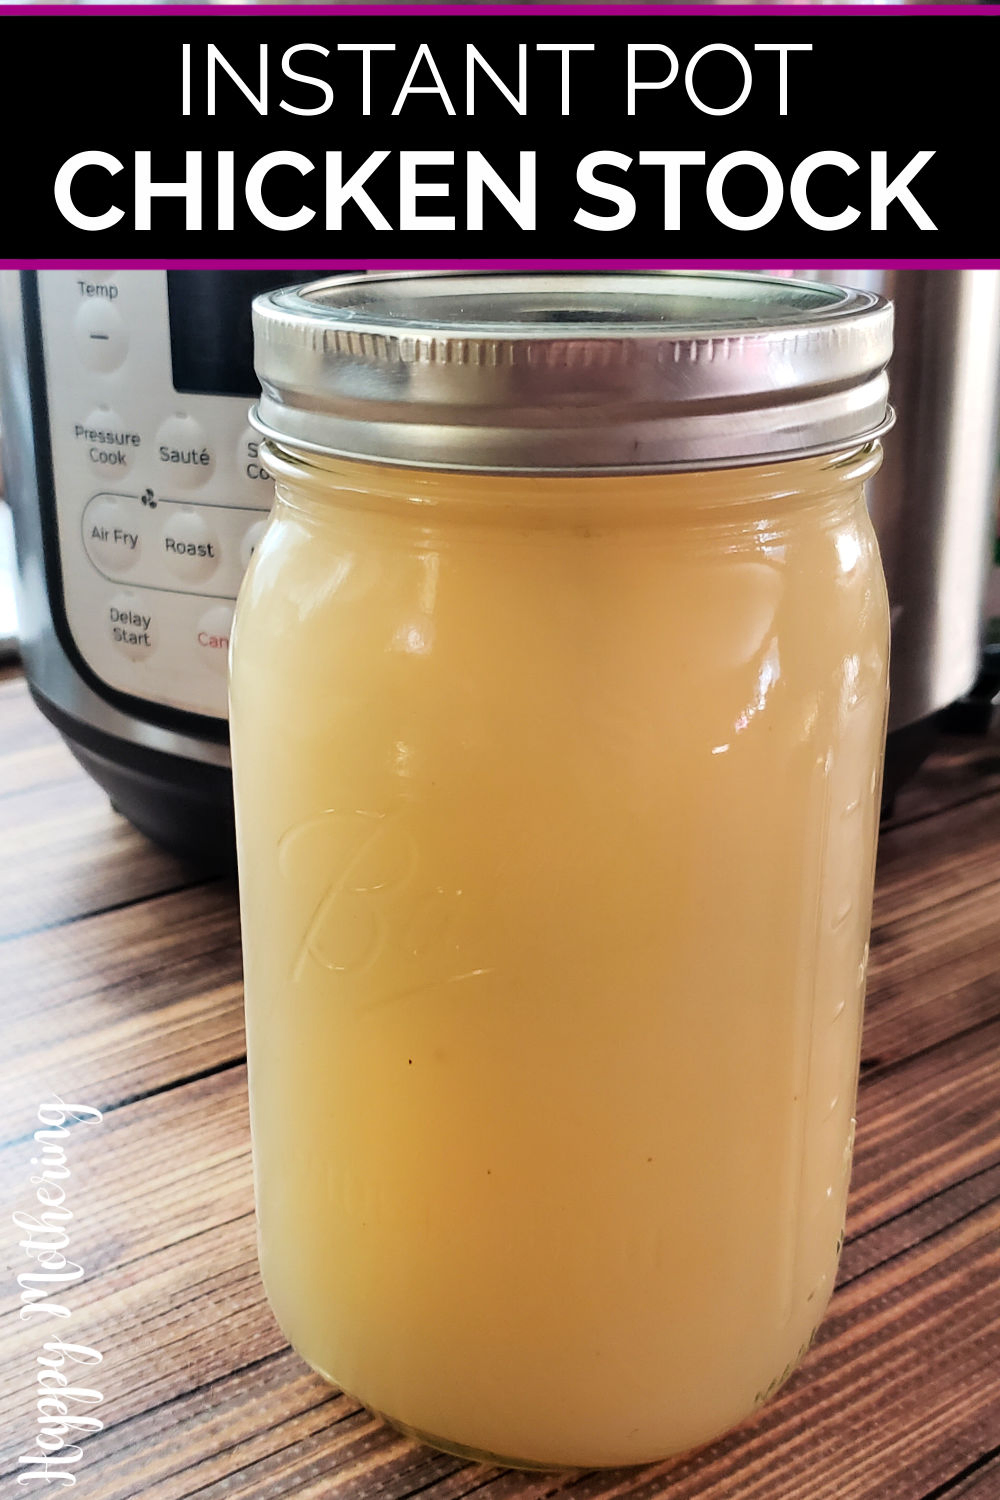 Quart sized jar of chicken stock in front of Instant Pot on wood table.